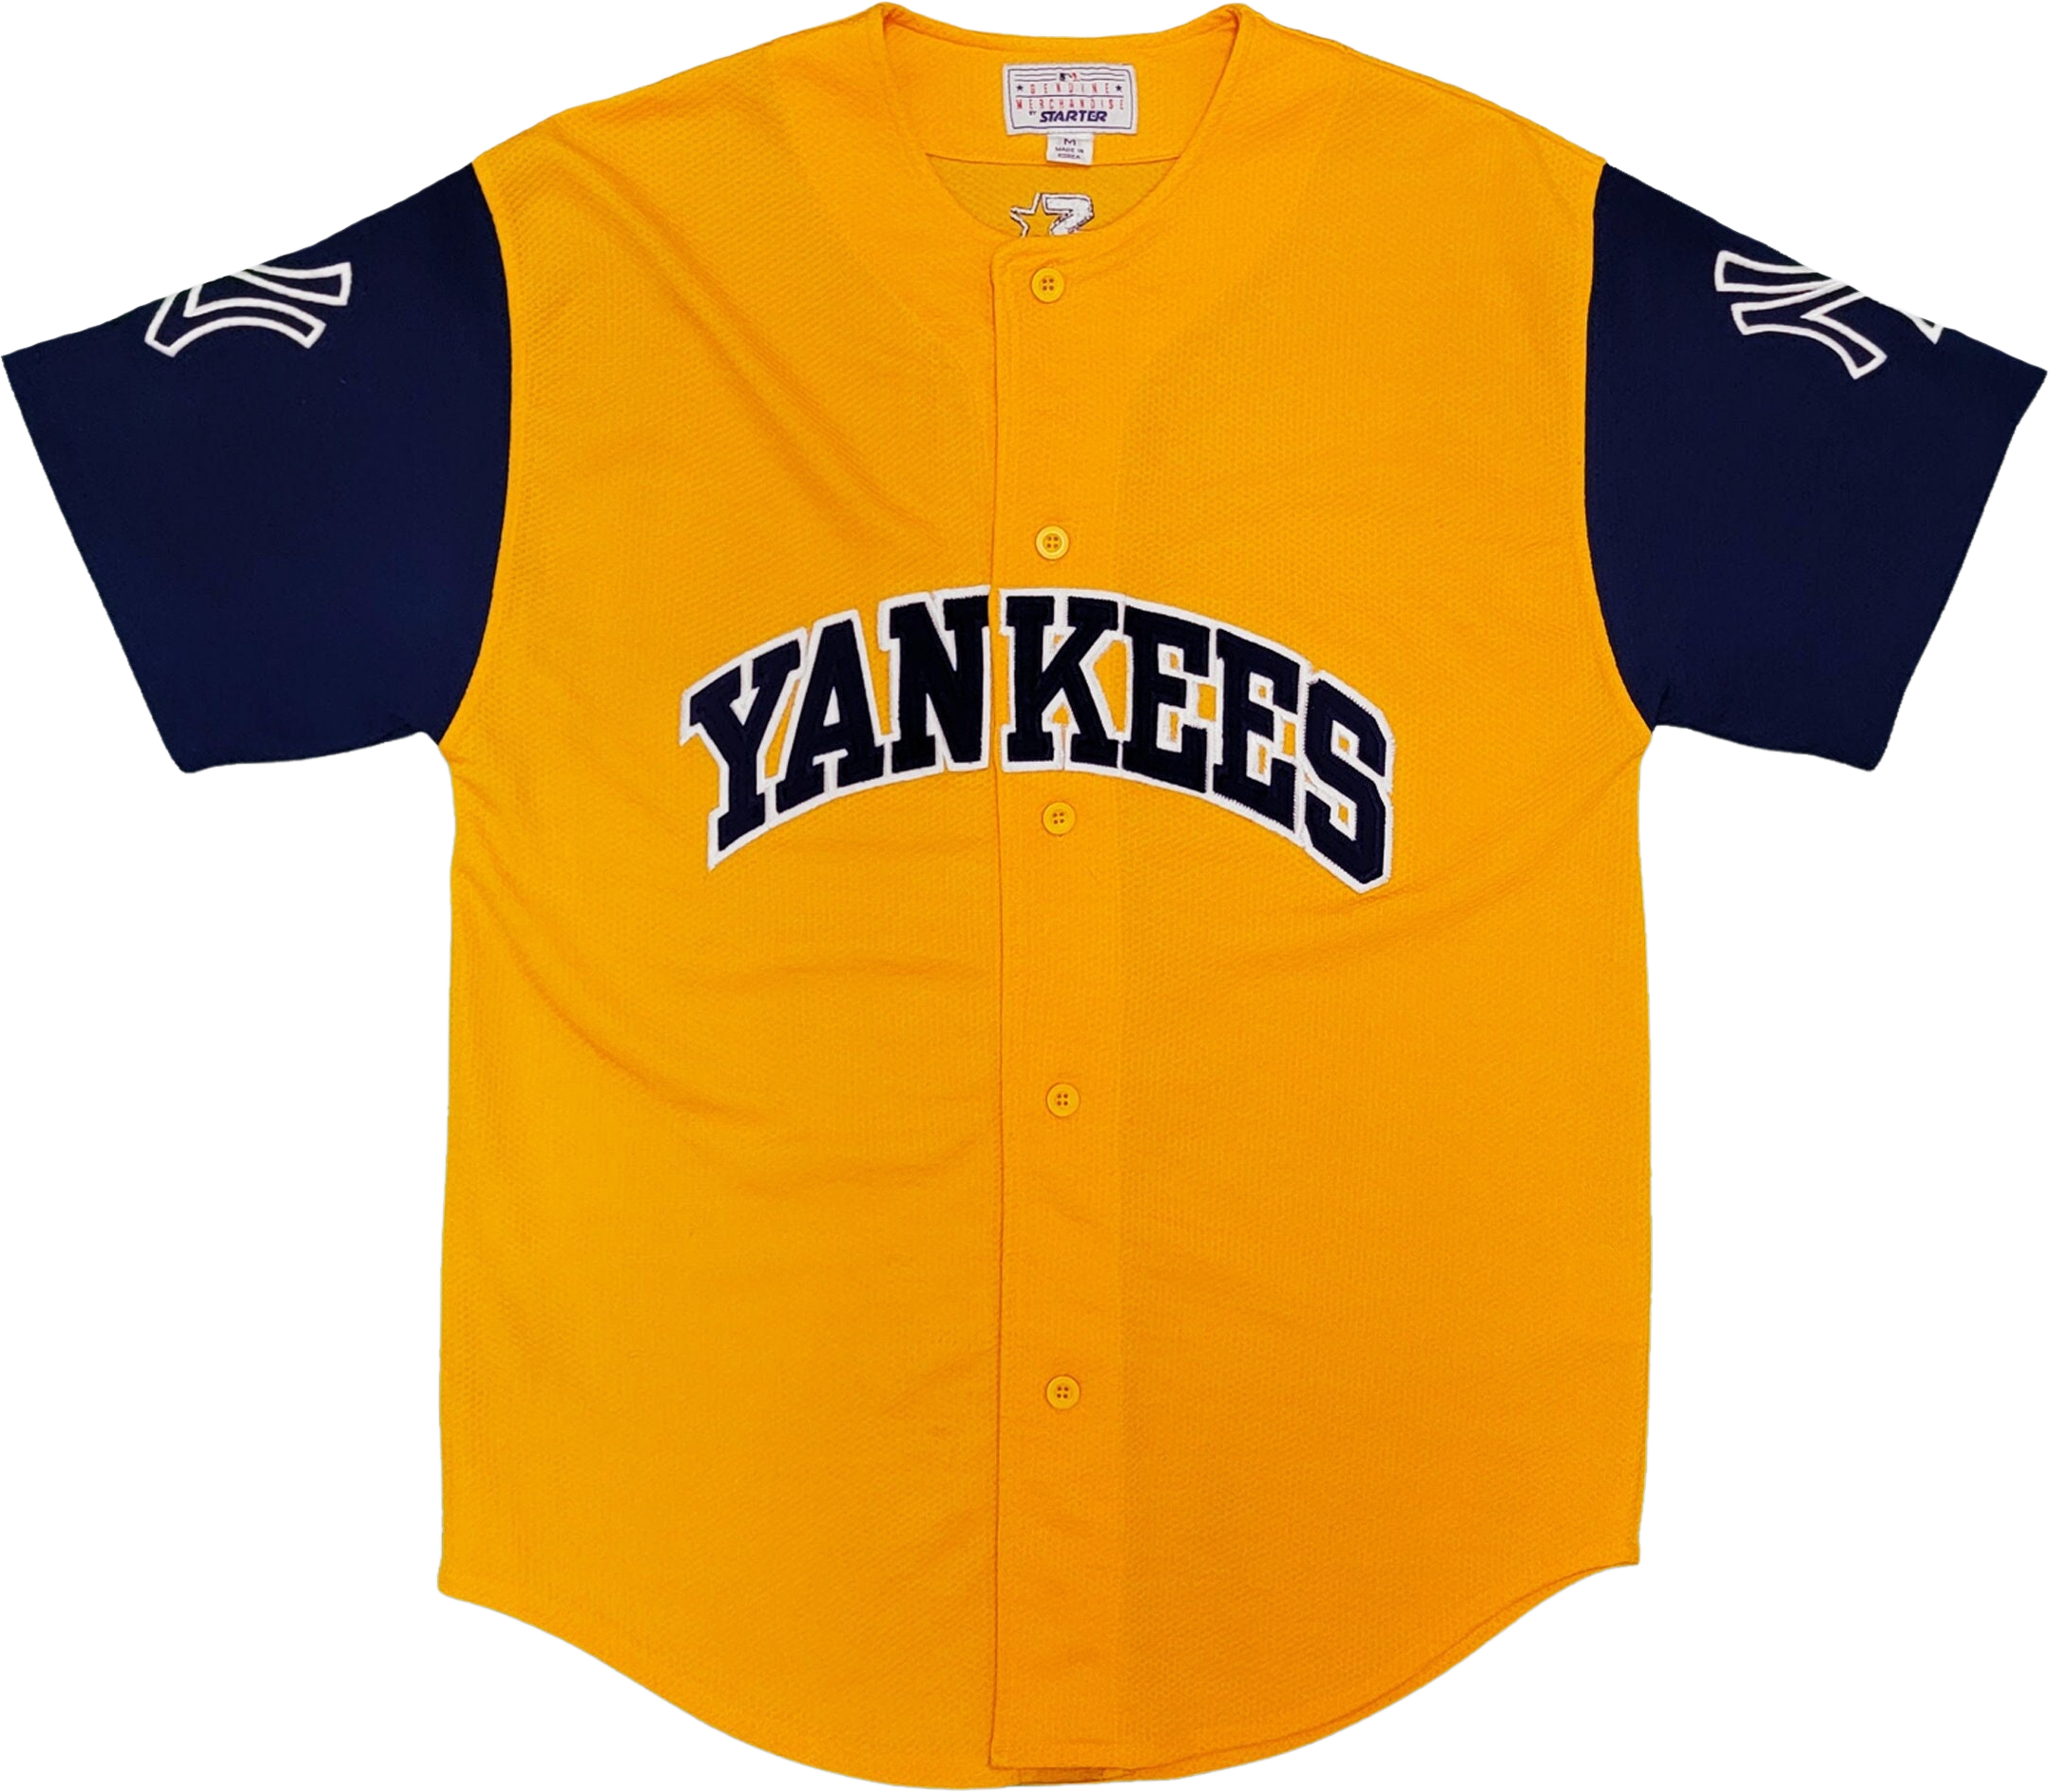 New York Yankees Vintage 90s Starter Yellow Baseball Jersey Rare Colorway  Yellow and Navy Blue Color Shirt